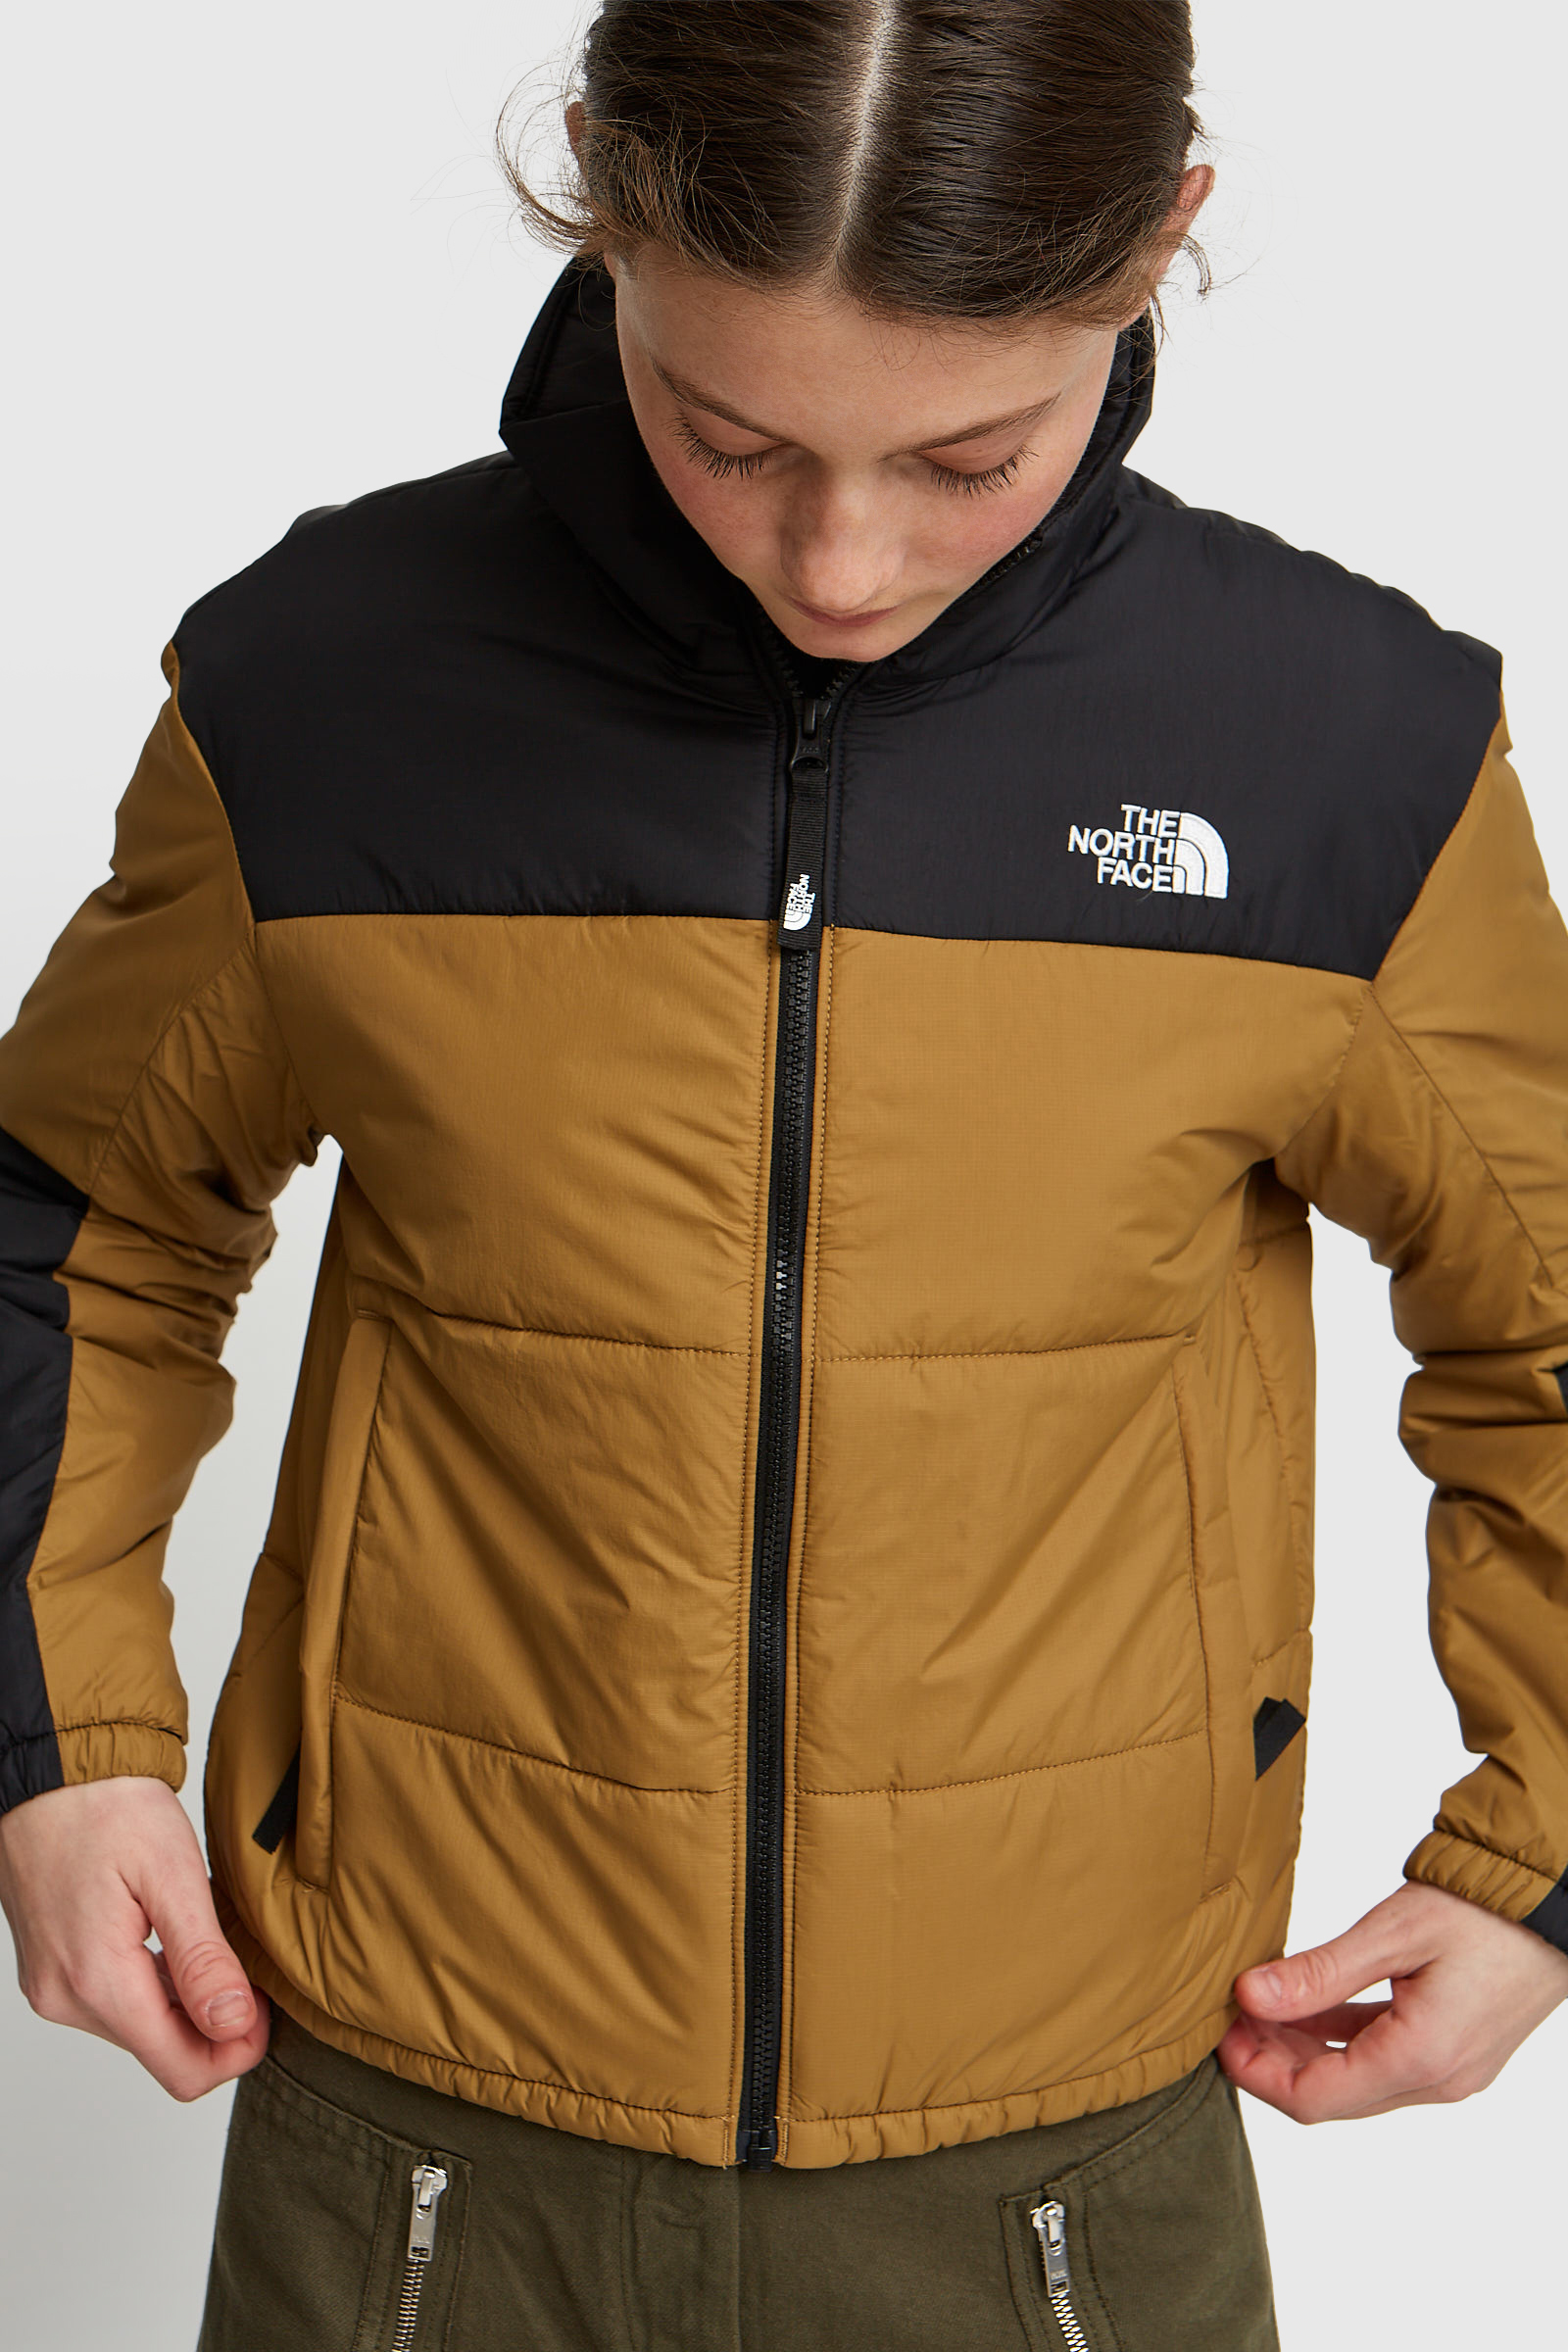 The North Face Gosei Puffer Jacket In Khaki And Black Exclusive To ASOS ...